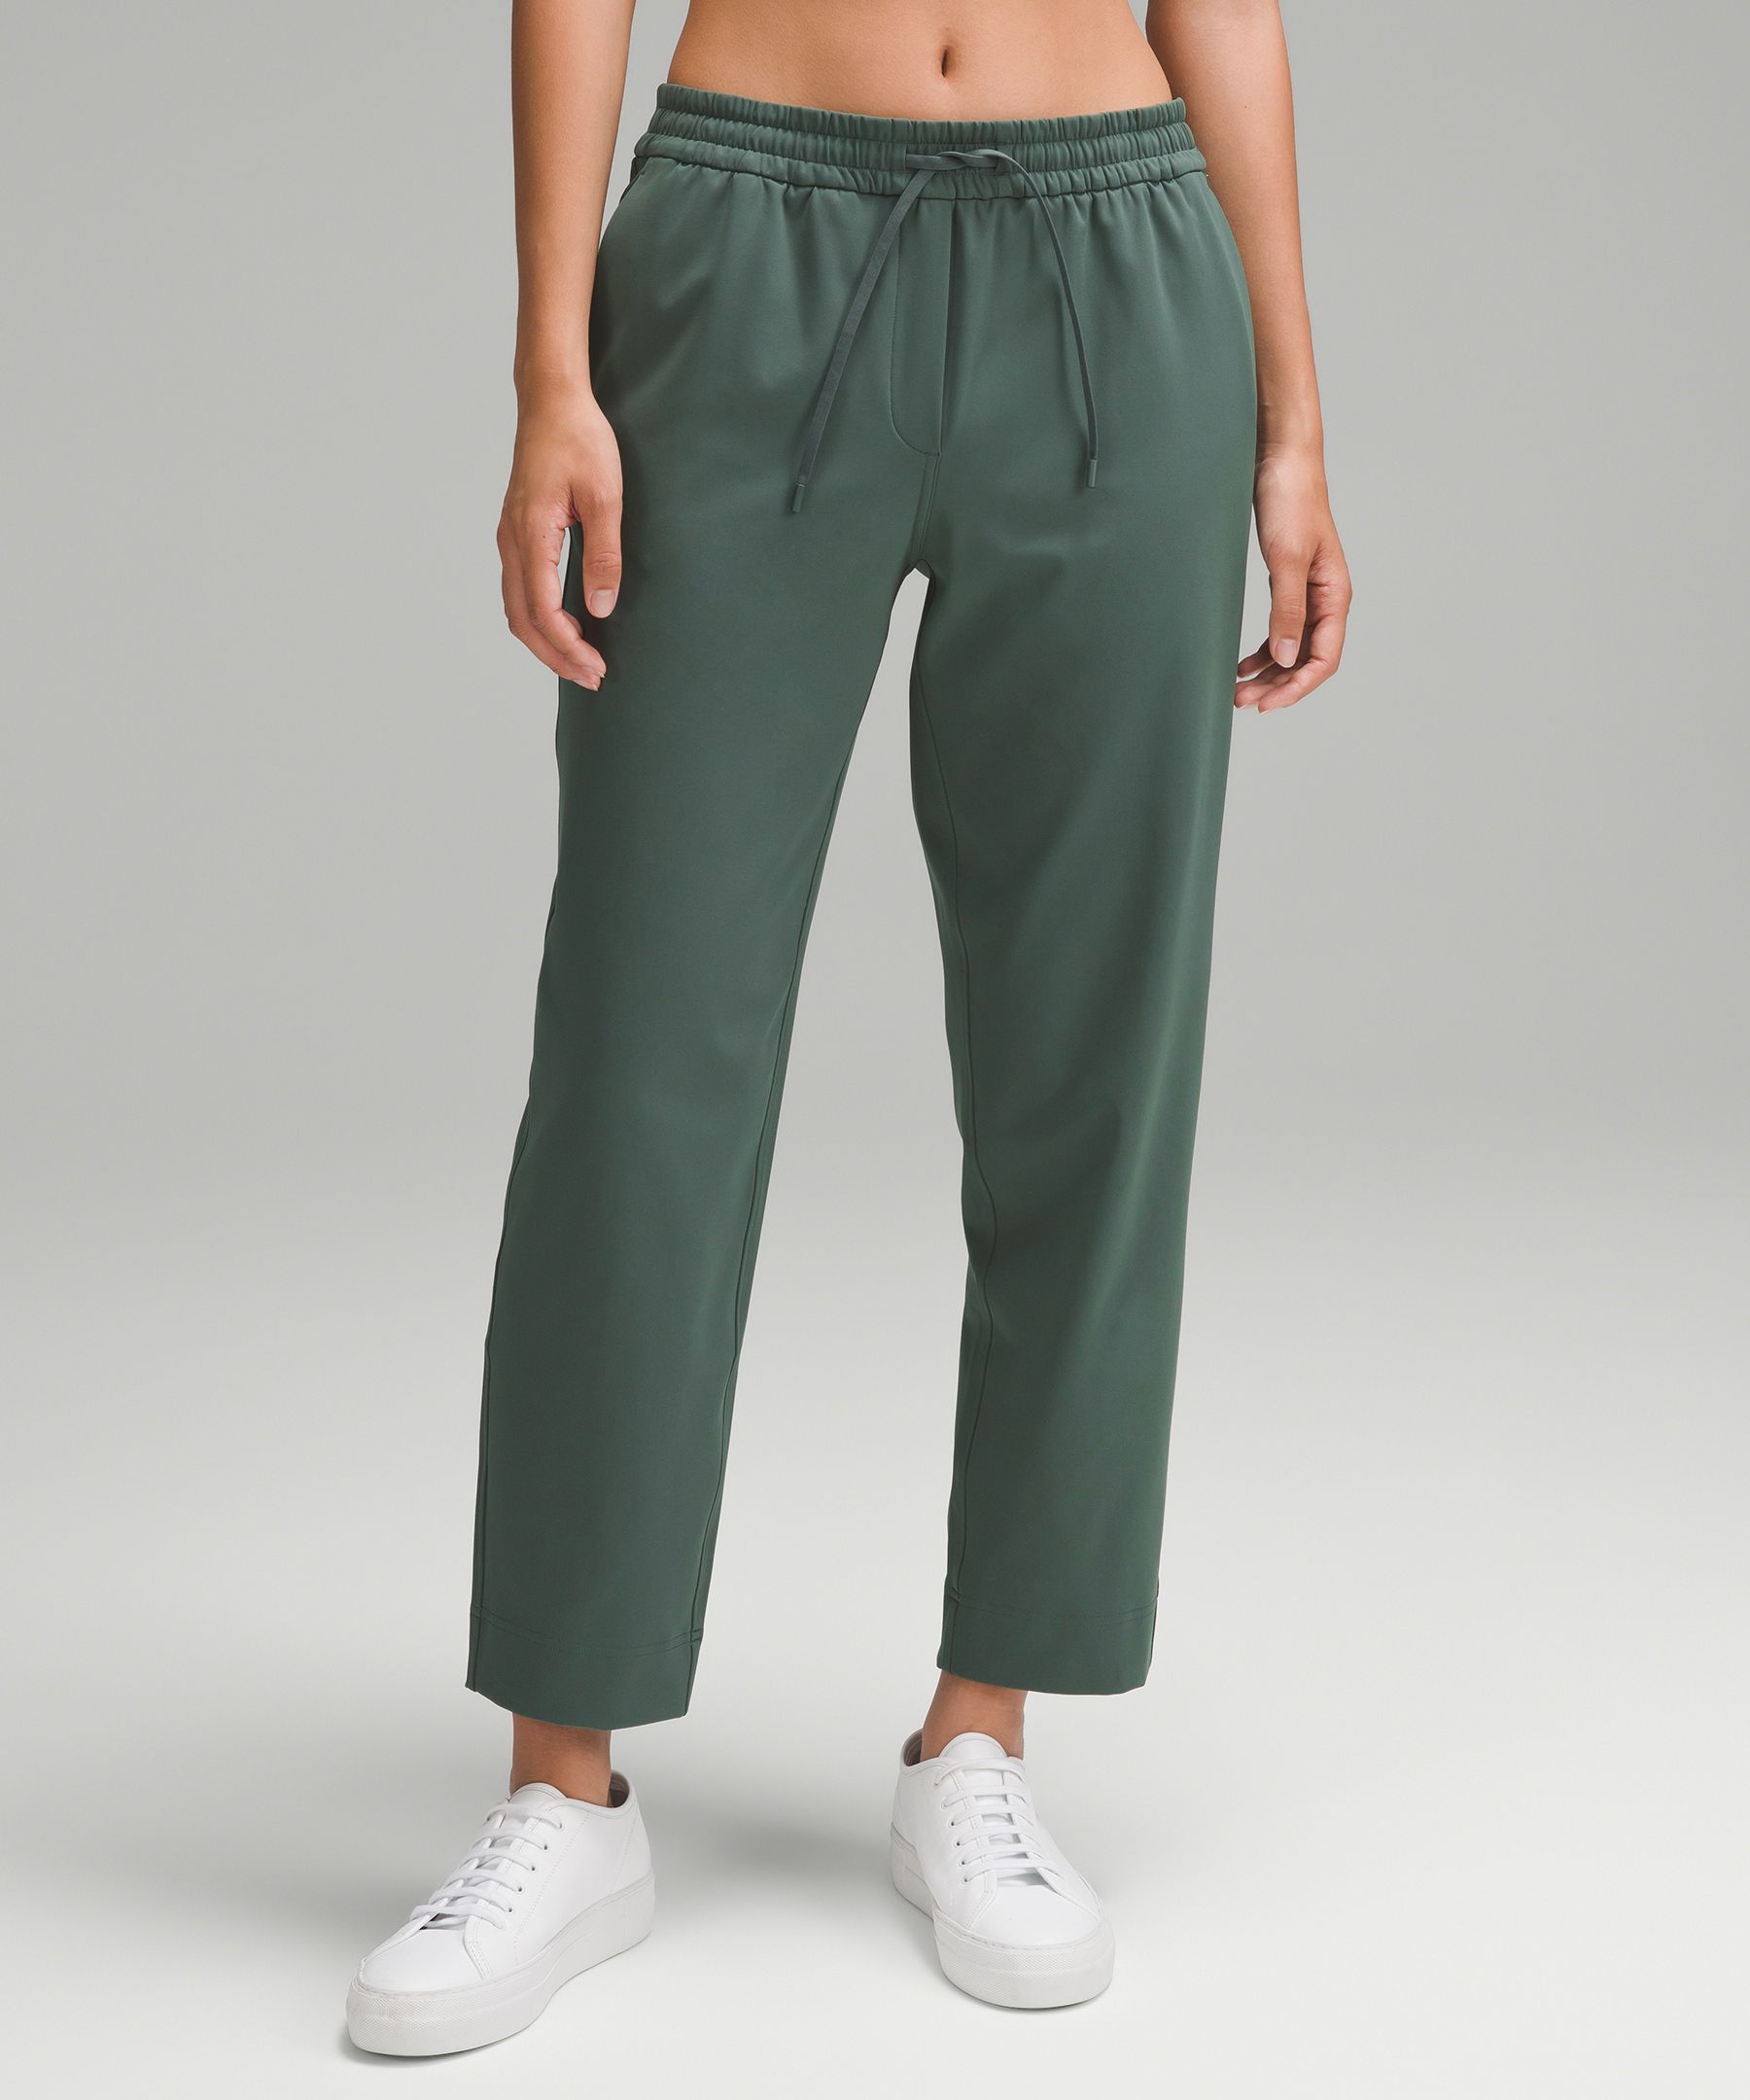 Tapered-Leg Mid-Rise Pant 7/8 Length *Luxtreme | Women's Trousers ...